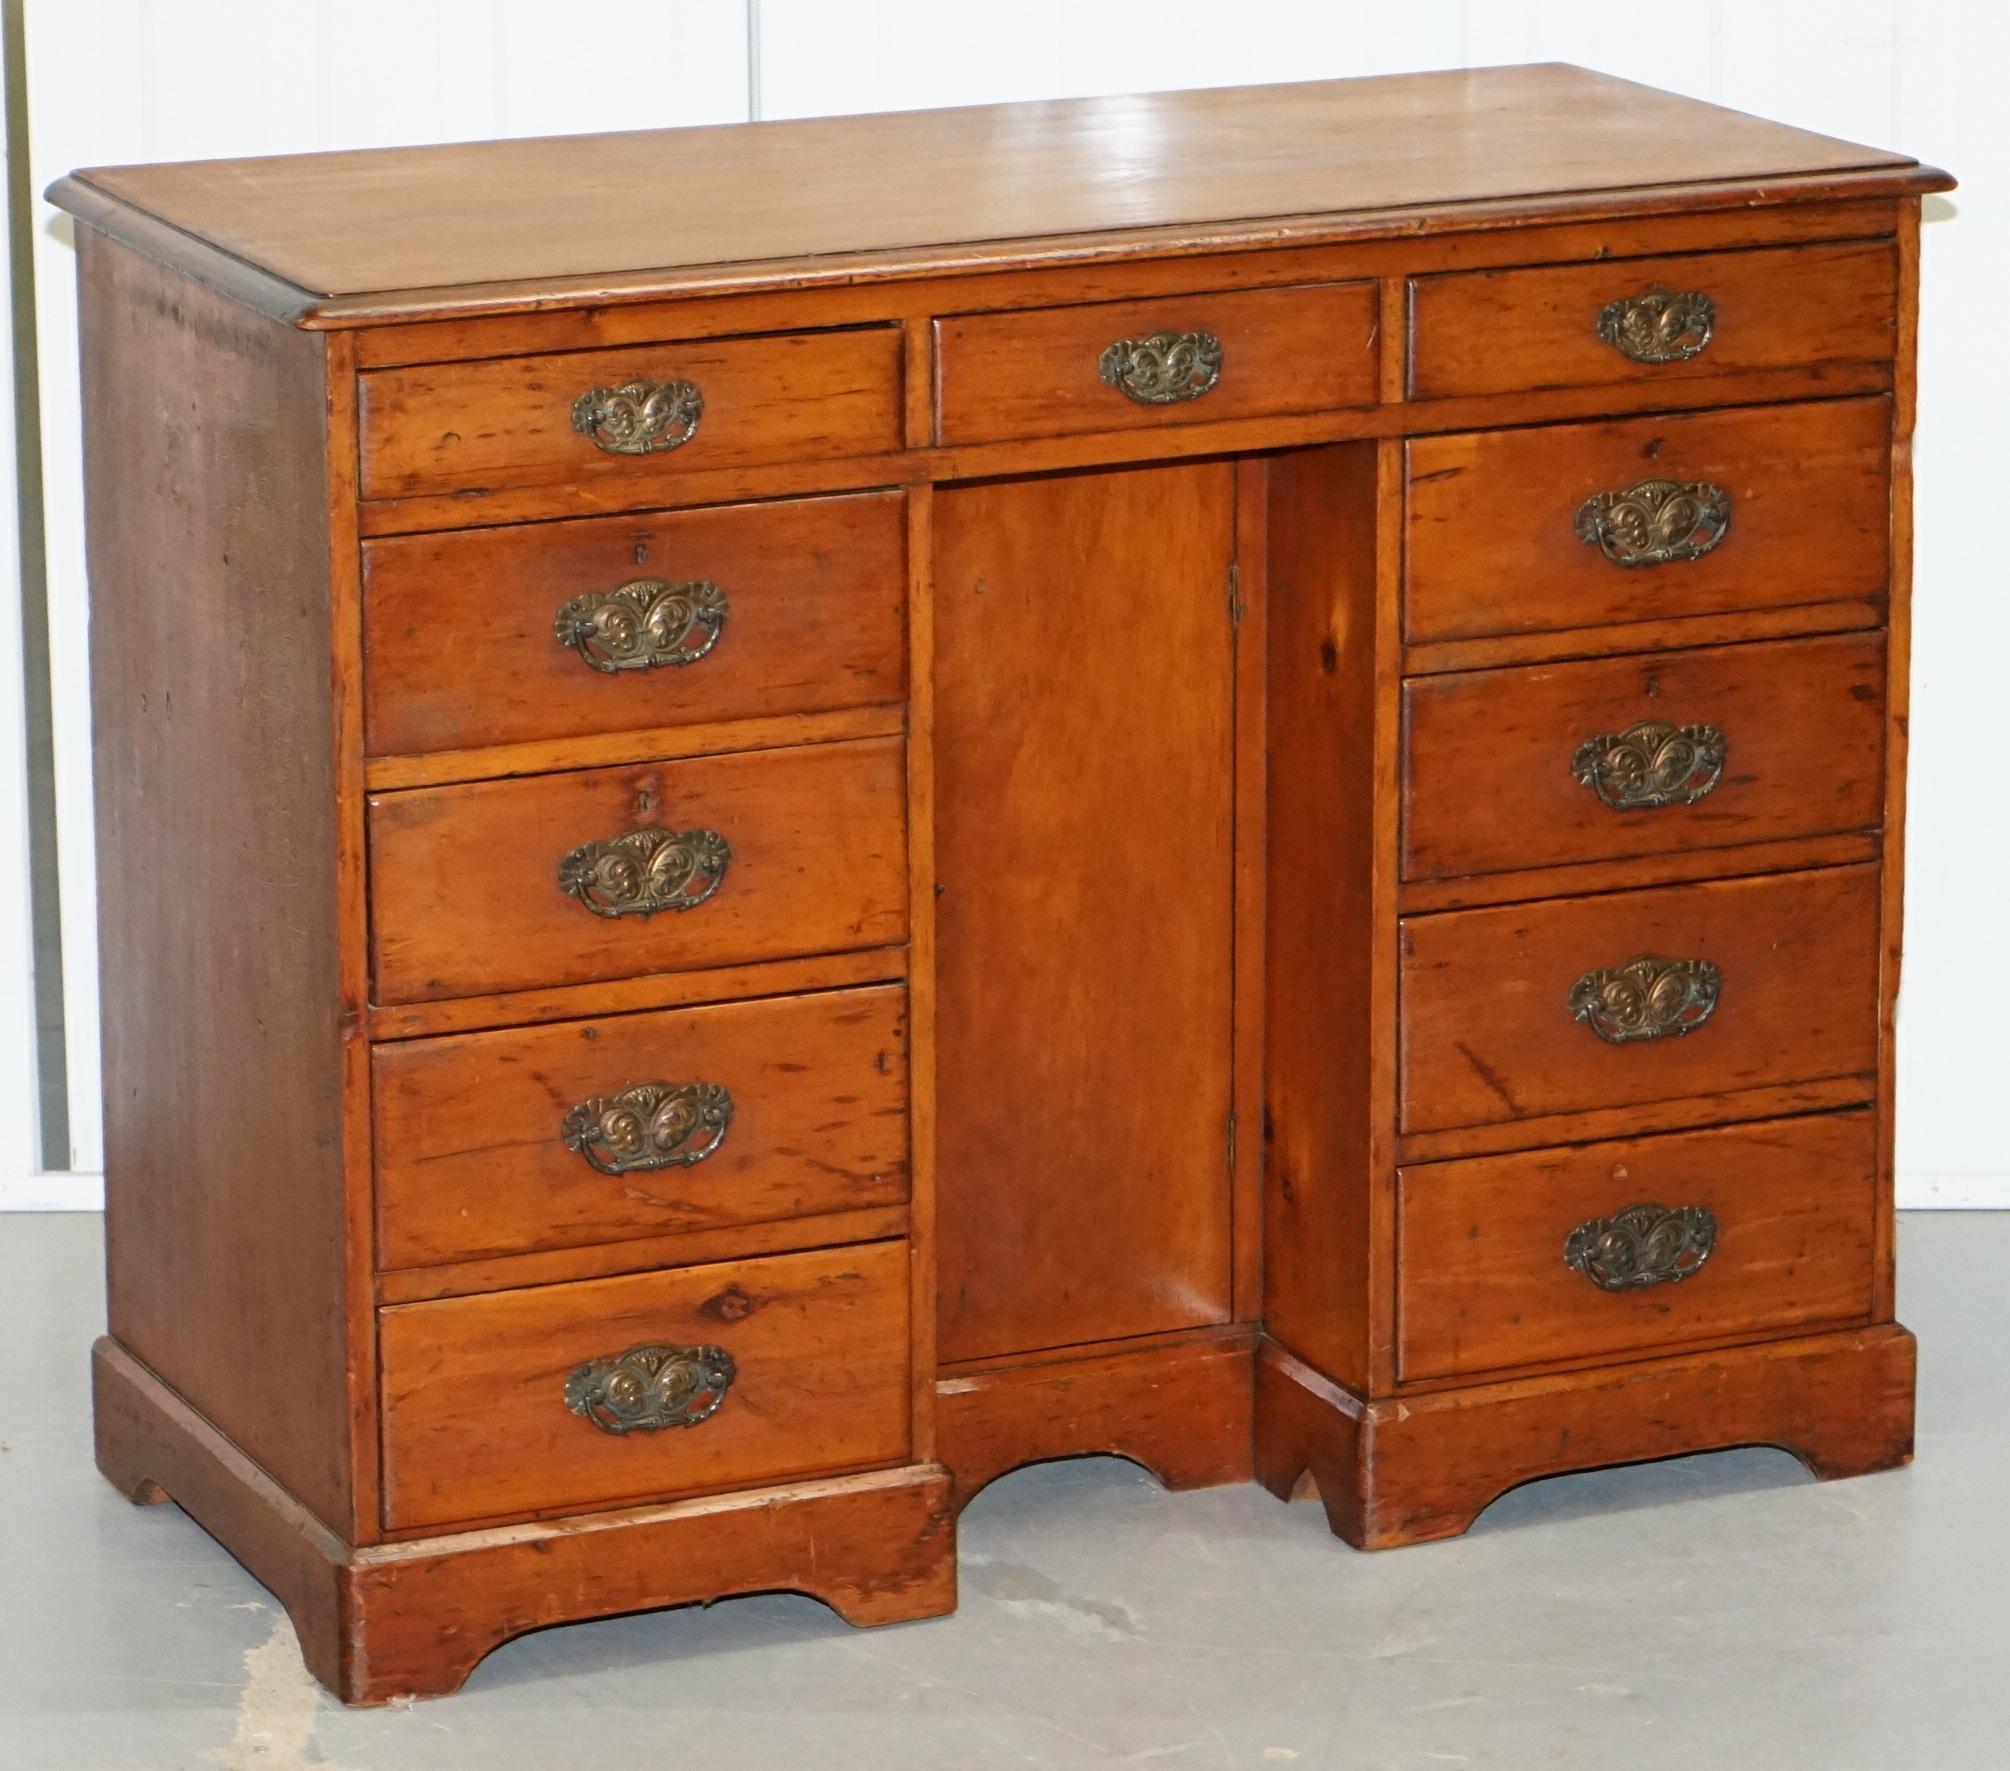 We are delighted to offer for sale this lovely Victorian walnut knee hole desk with lots of drawers and storage

A fantastically well made desk, ideally suited for a location where space is at a premium and or as a children’s study desk

The top